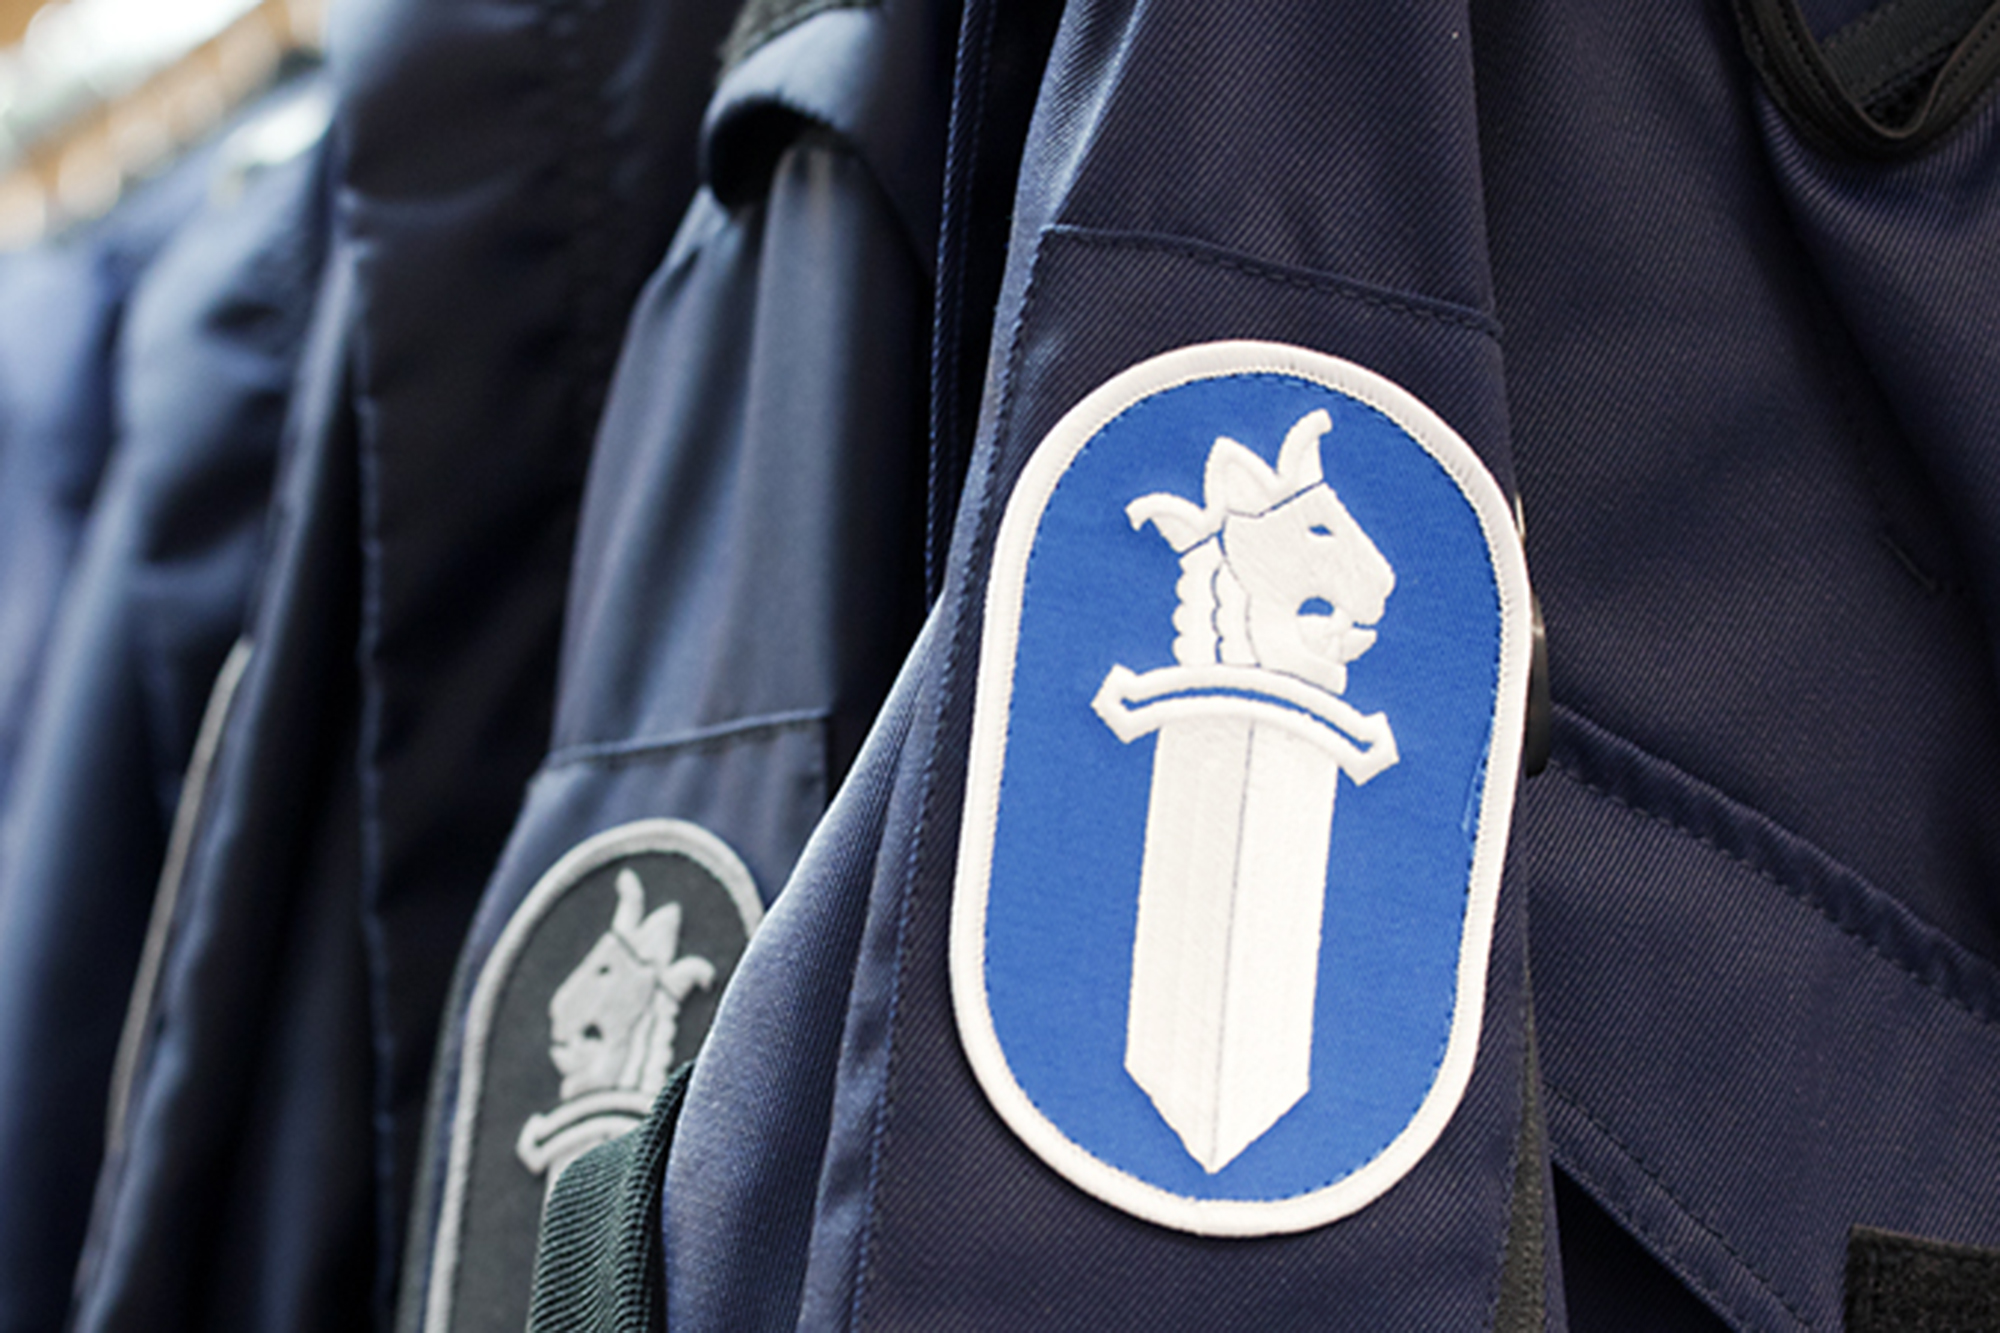 Sleeve badges on police overalls showing the emblem of the Finnish police.